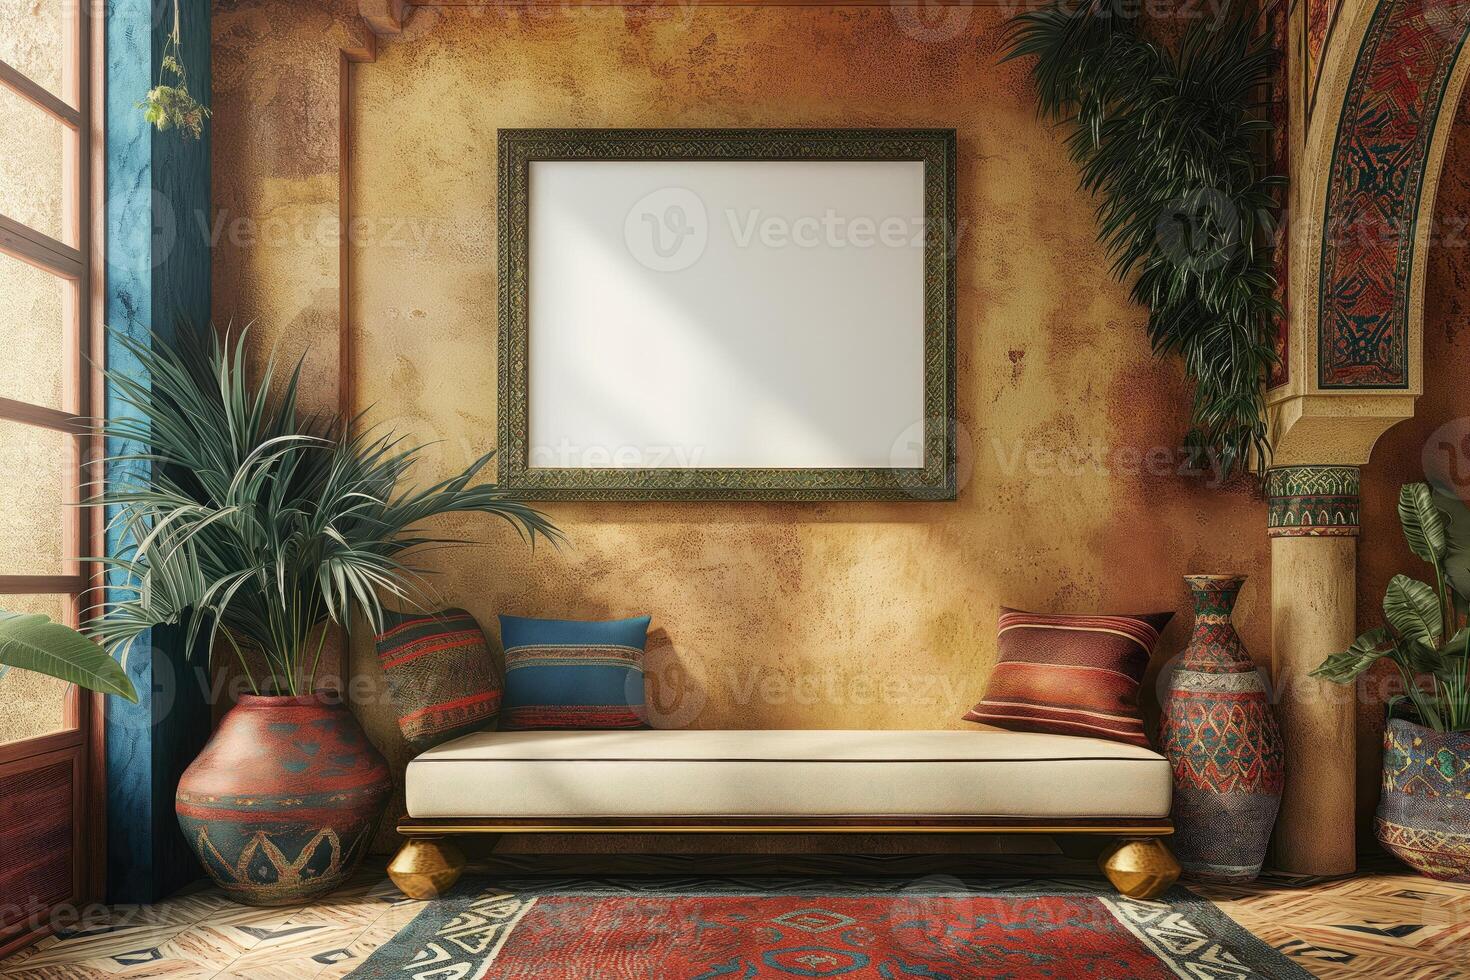 A mockup of a blank square photo frame hanging in the middle of wall with Moroccan, Middle Eastern, vibrant decoration.